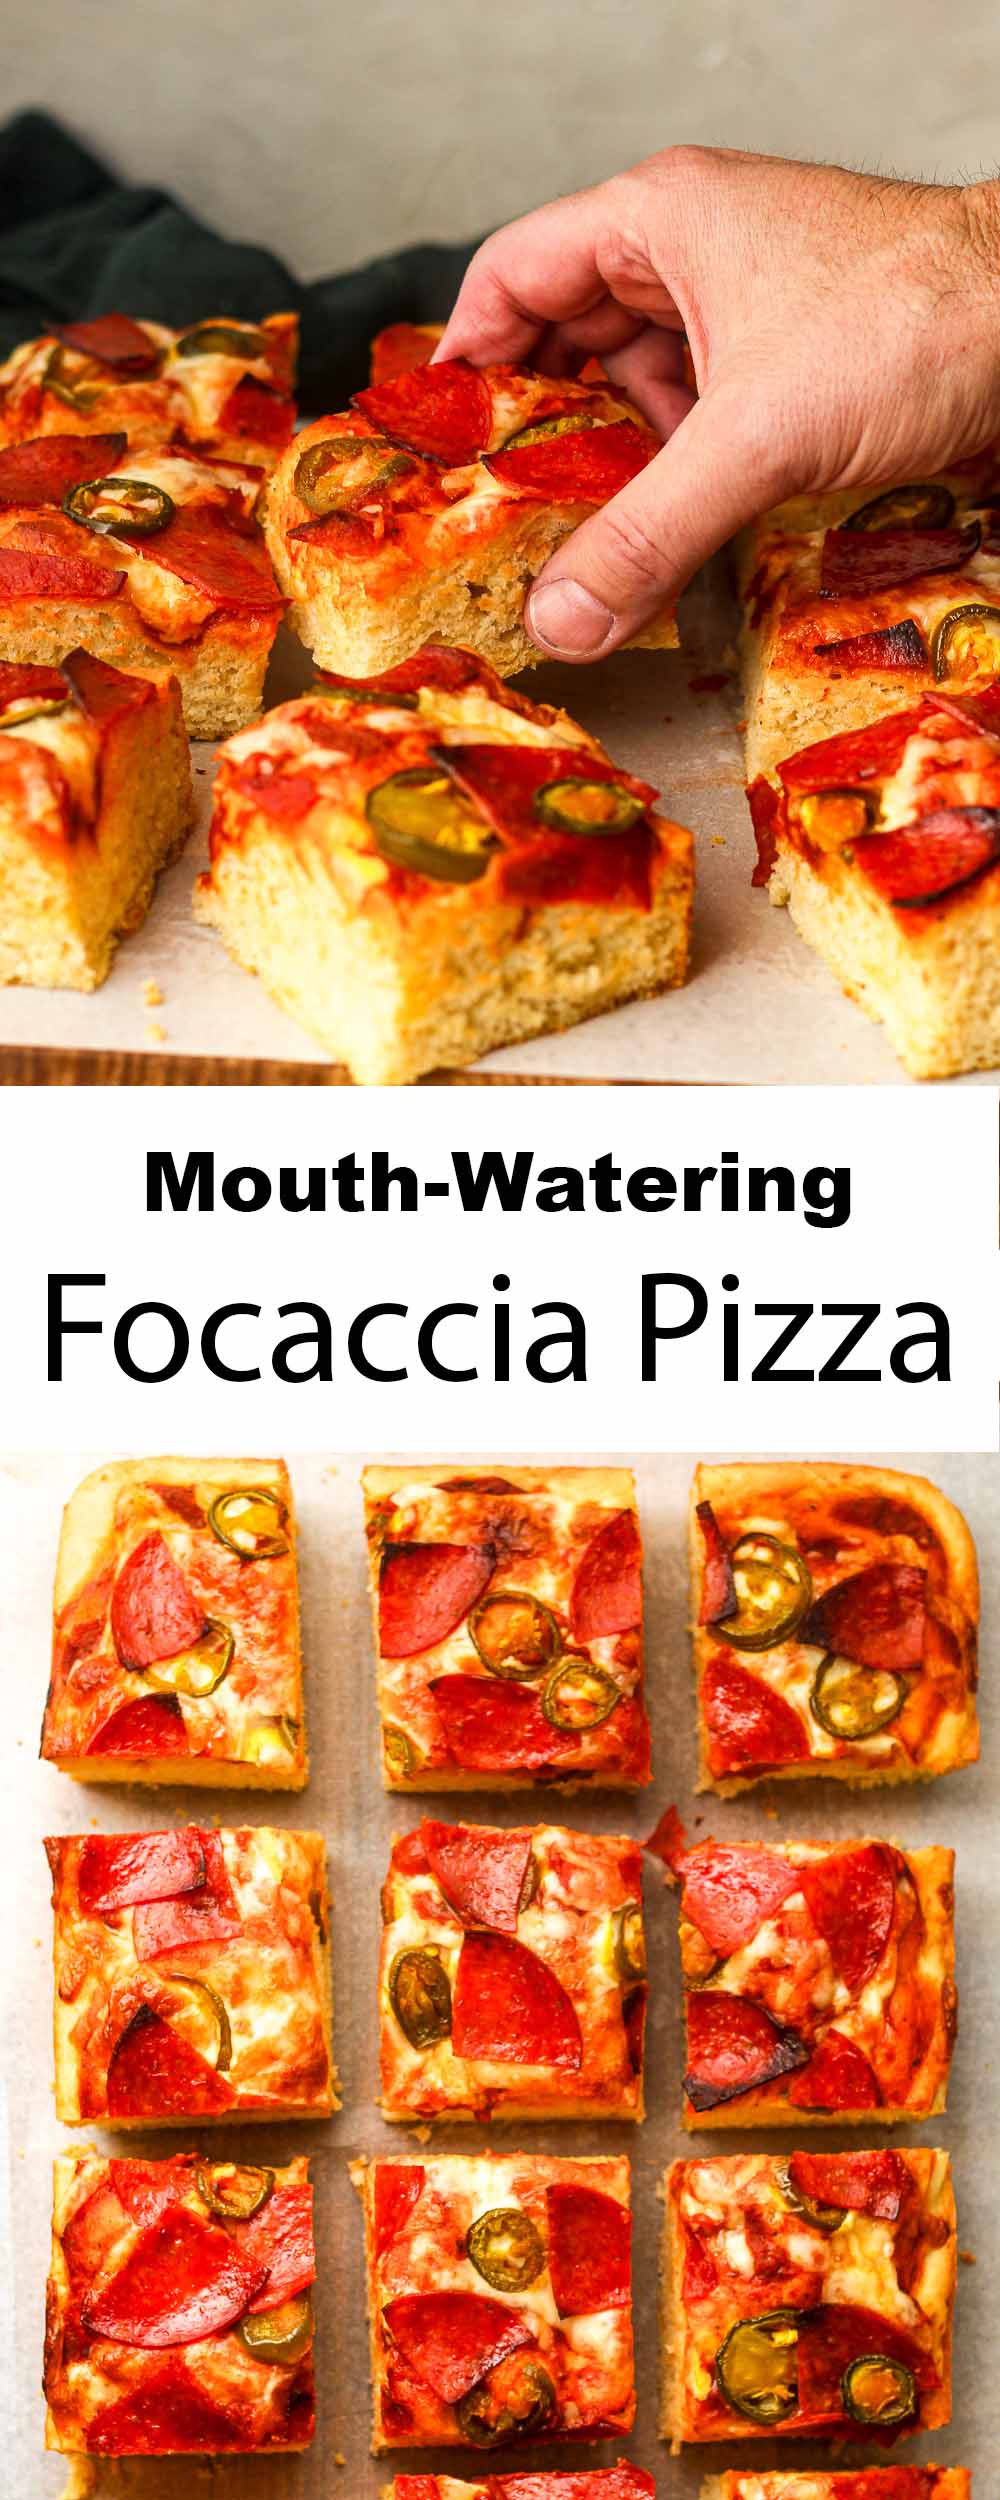 A collage of mouth-watering focaccia pizza.